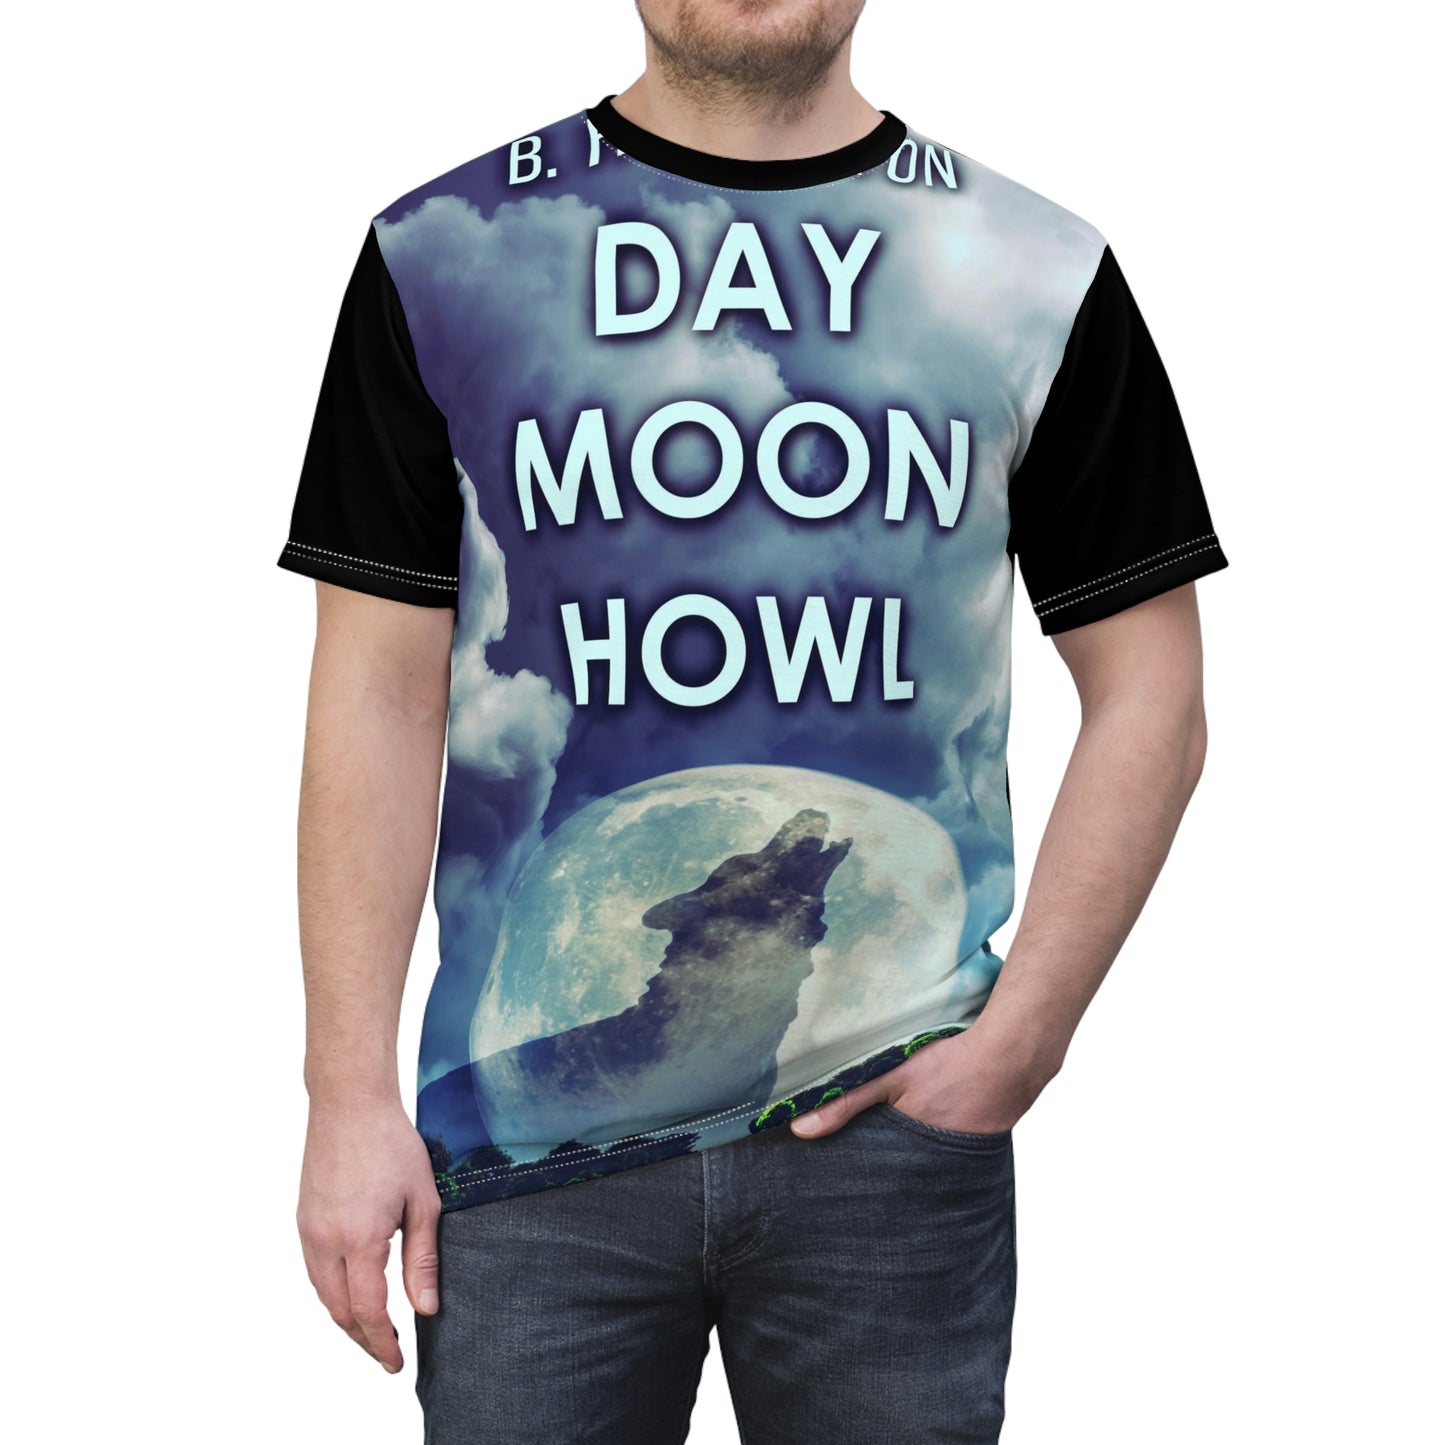 Day Moon Howl - Unisex All-Over Print Cut & Sew T-Shirt